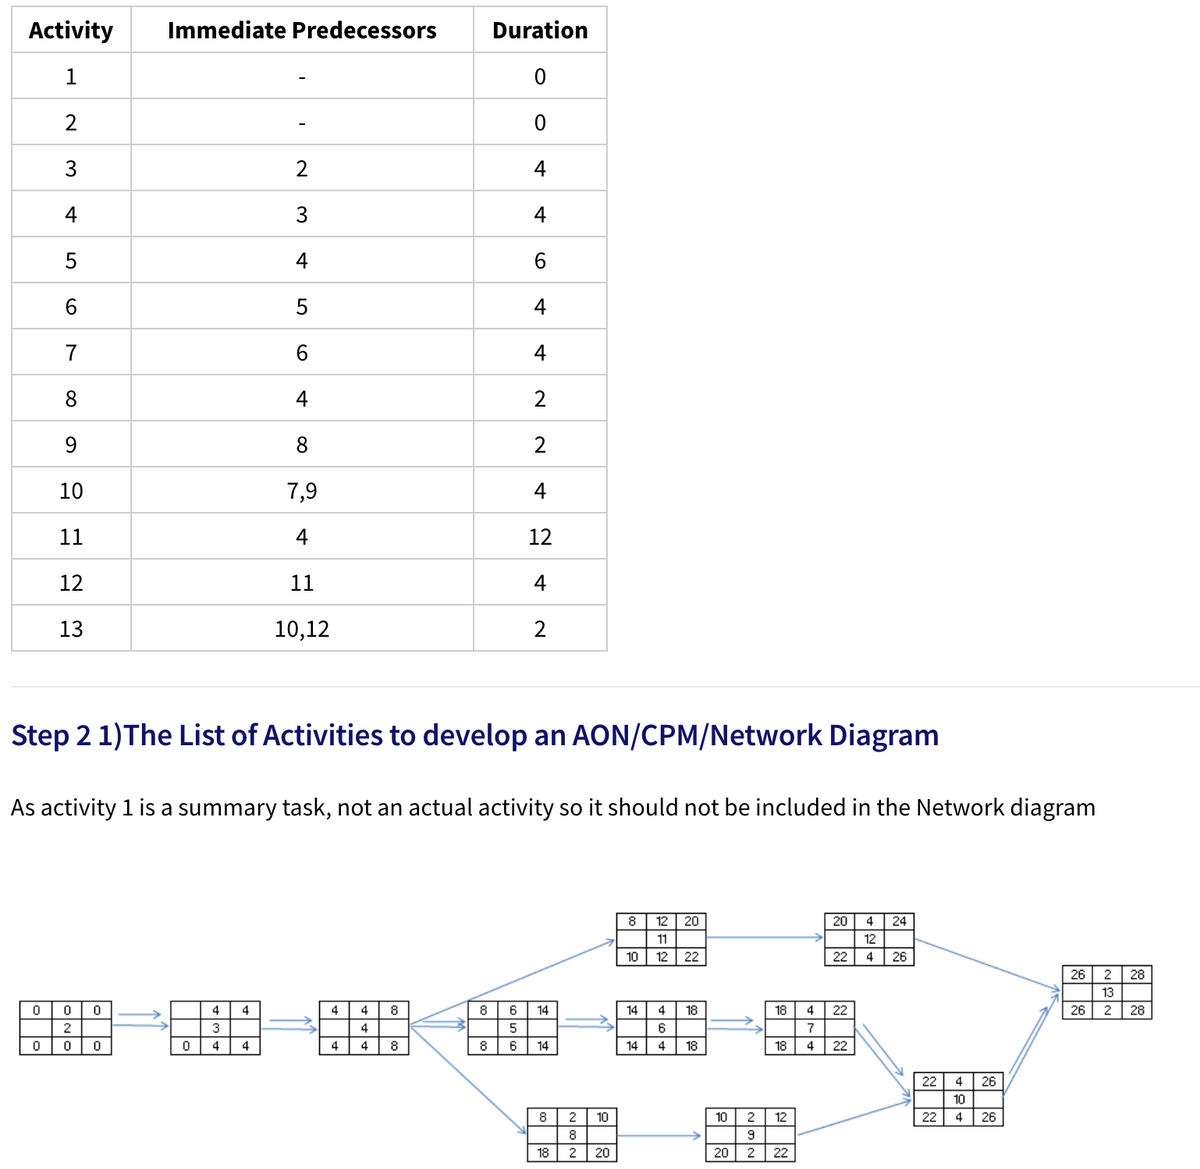 Activity
Immediate Predecessors
Duration
1
3
4
4
3
4
4
7
6.
4
8
4
2
9.
10
7,9
11
4
12
12
11
4
13
10,12
2
Step 2 1)The List of Activities to develop an AON/CPM/Network Diagram
As activity 1 is a summary task, not an actual activity so it should not be included in the Network diagram
8
12
20
20
24
11
12
10
12
22
22
4
26
26
2
28
13
4
4
4
4.
8
8
6
14
14
4
18
18
4
22
26
2
28
3
6.
4
4
4
4
8
8
6
14
14
4
18
18
4
22
22
4
26
10
8
2
10
10
2
12
22
4
26
8
18
2
20
20
2
22
2.
4-
